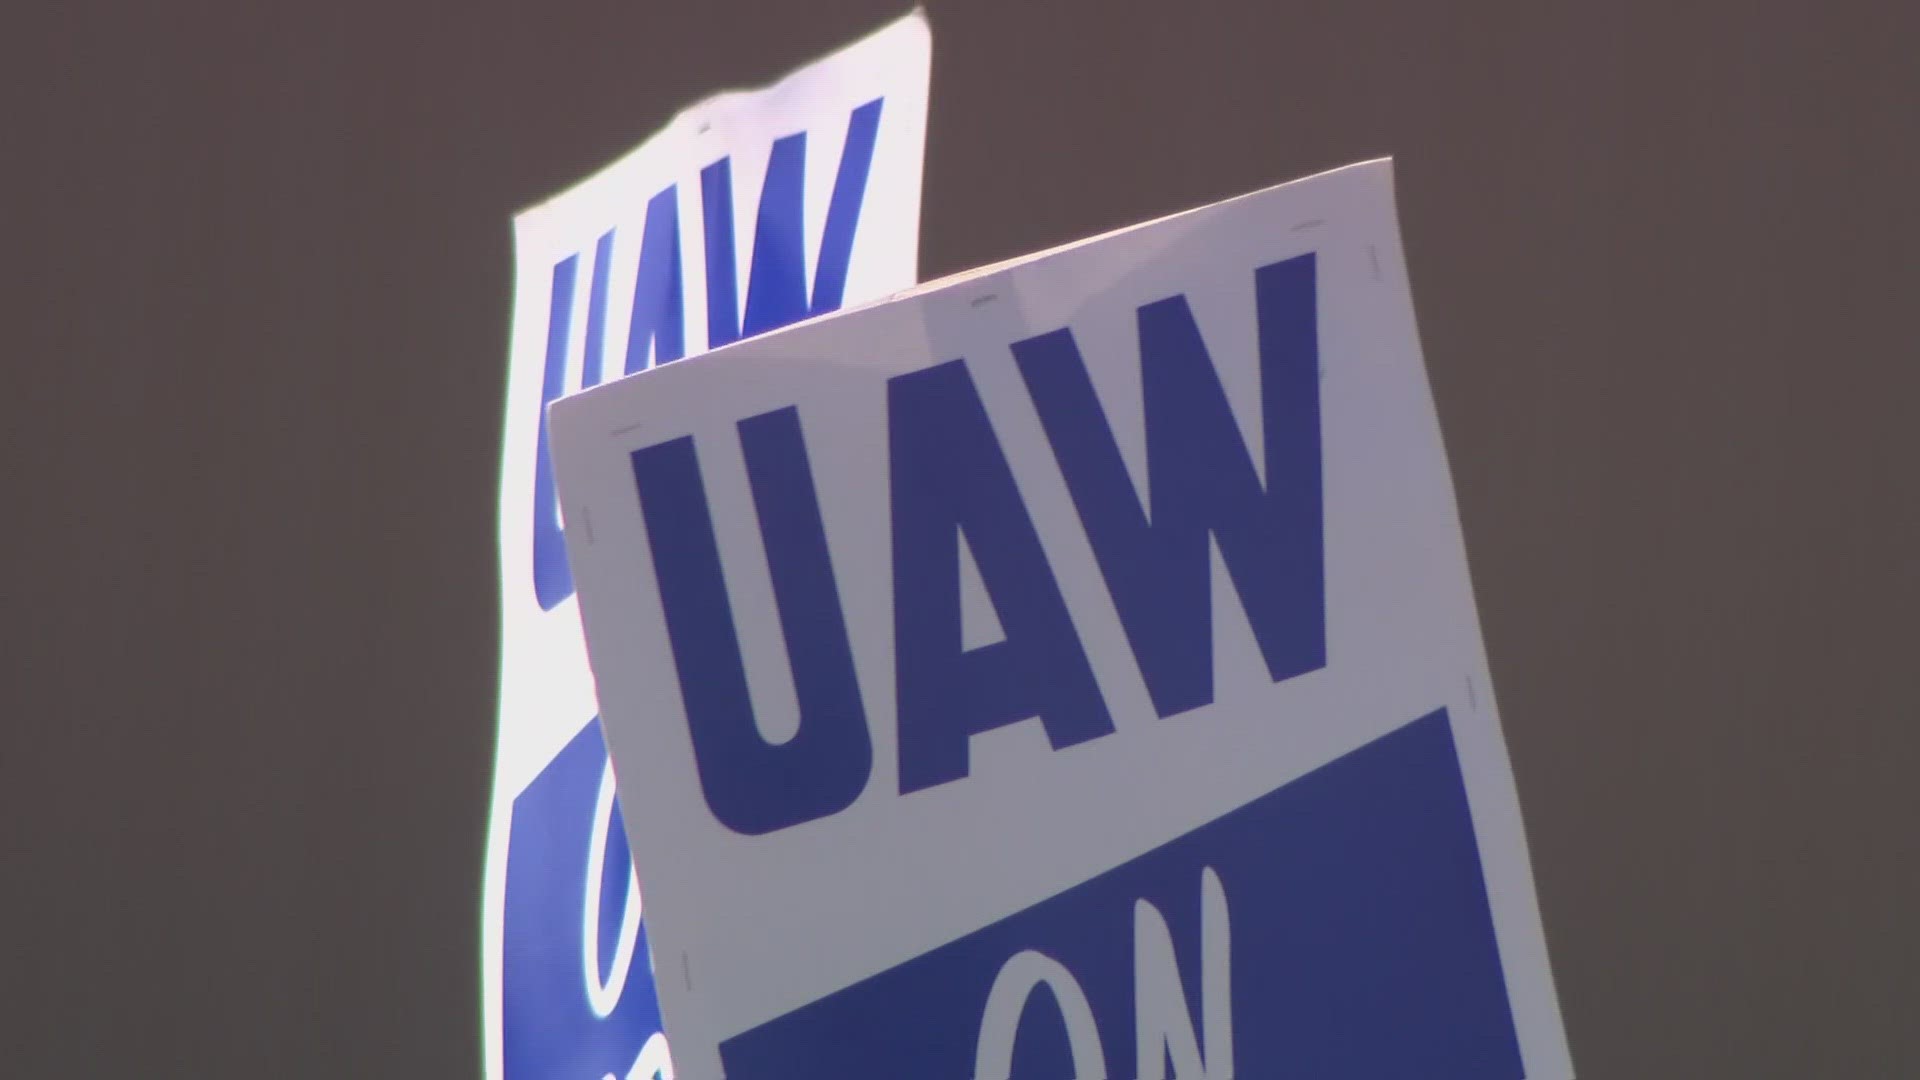 Union workers started showing up at their union hall Thursday night to prepare to form a picket line.